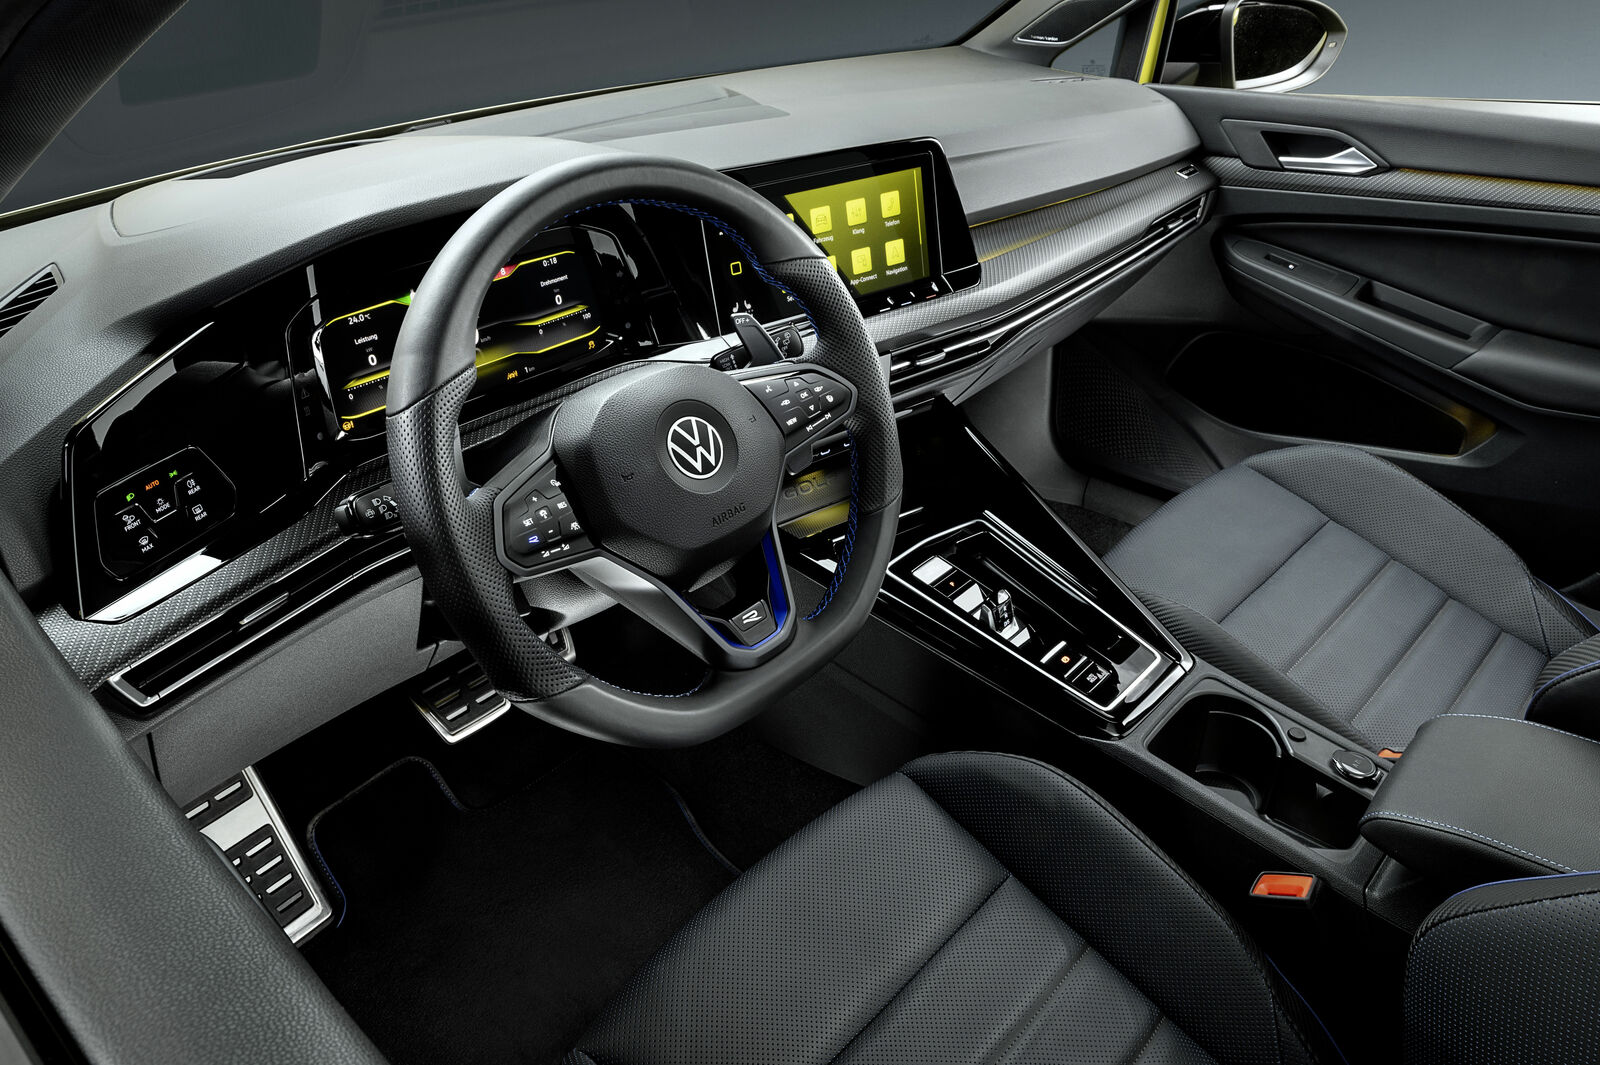 Exclusive Golf R 333 Limited Edition model: a highlight both inside and out